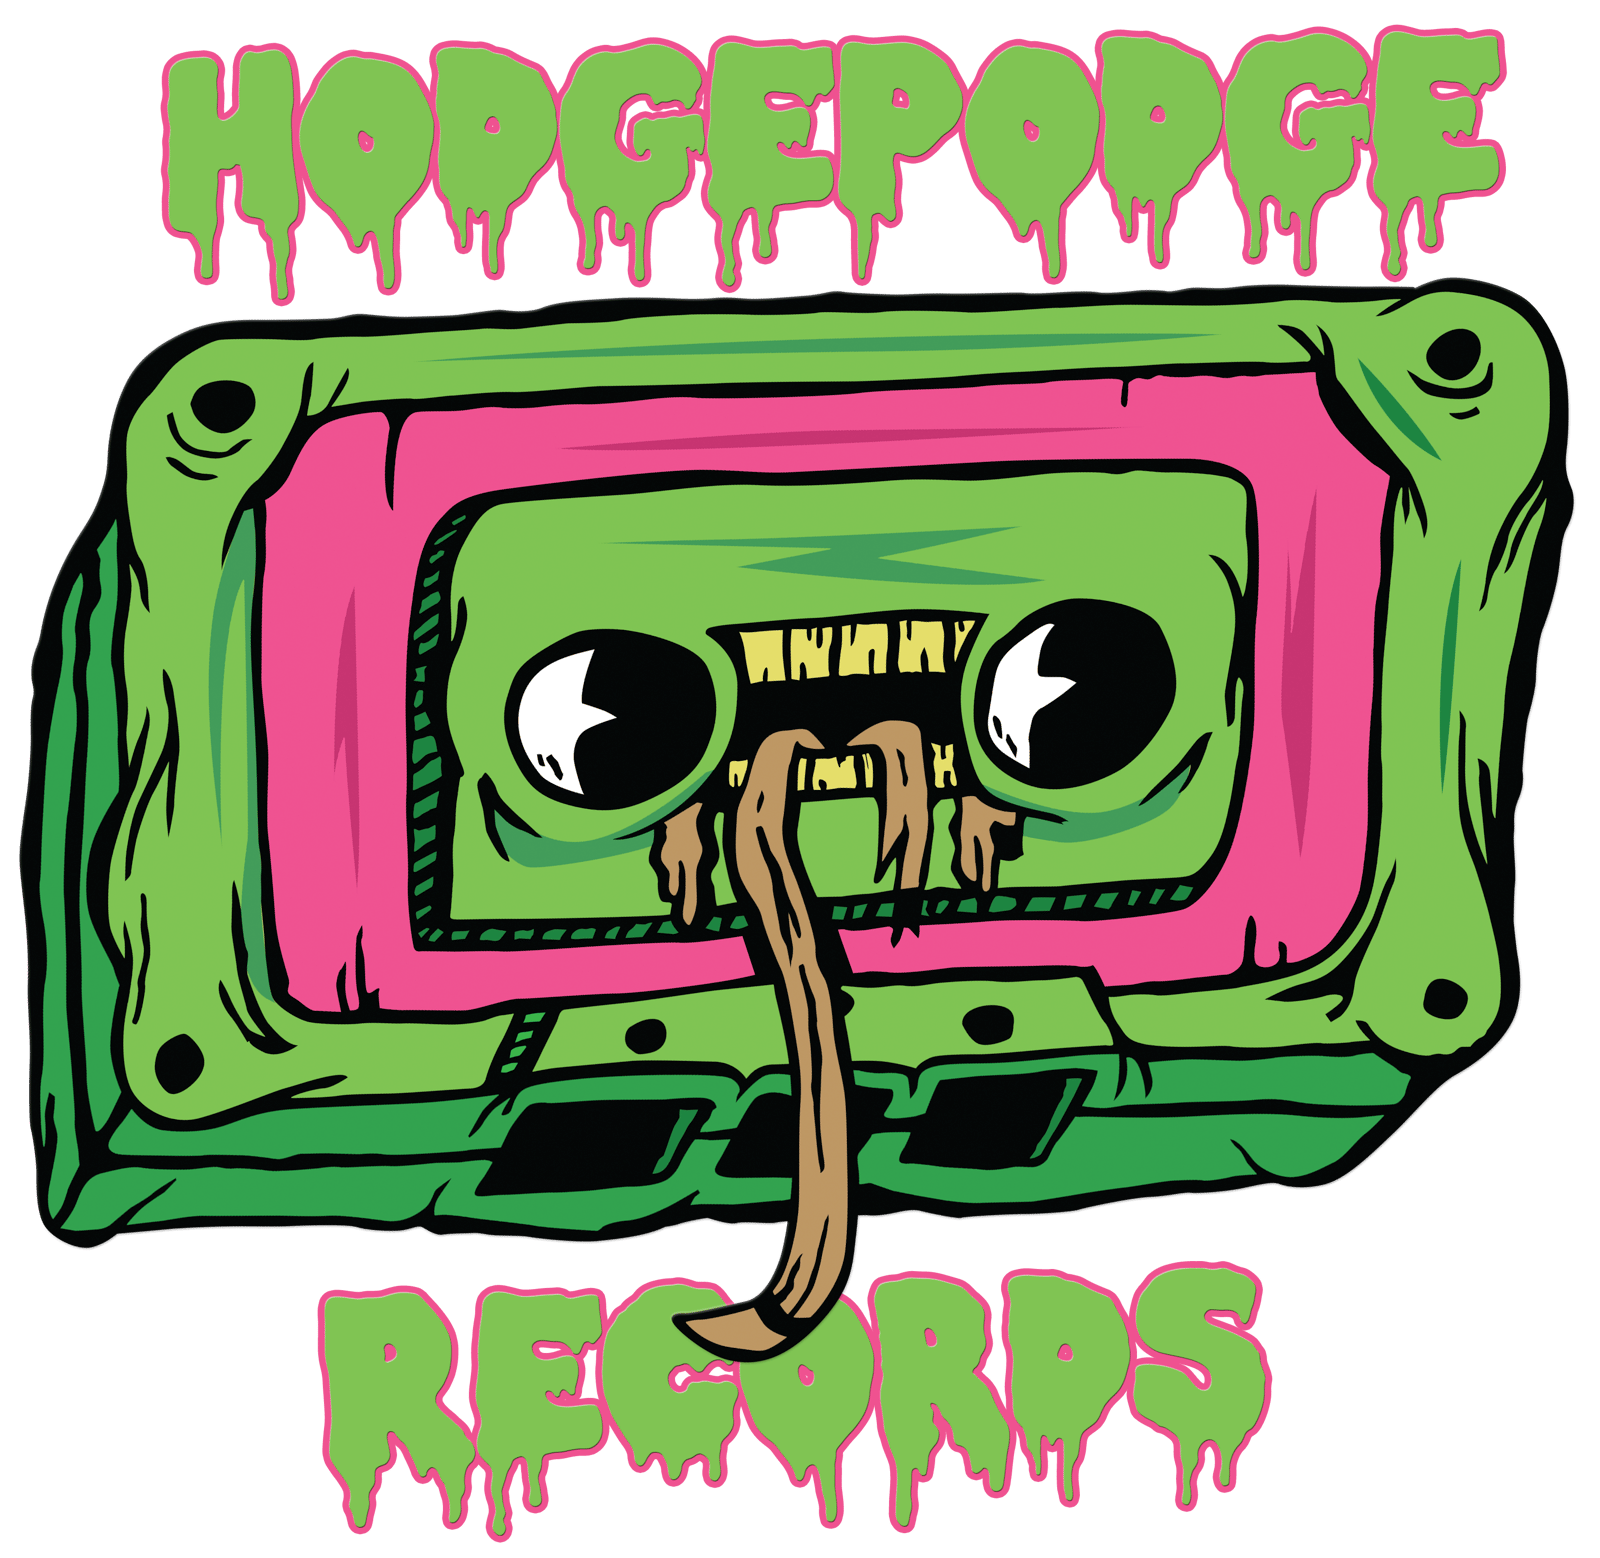 HodgePodge Records